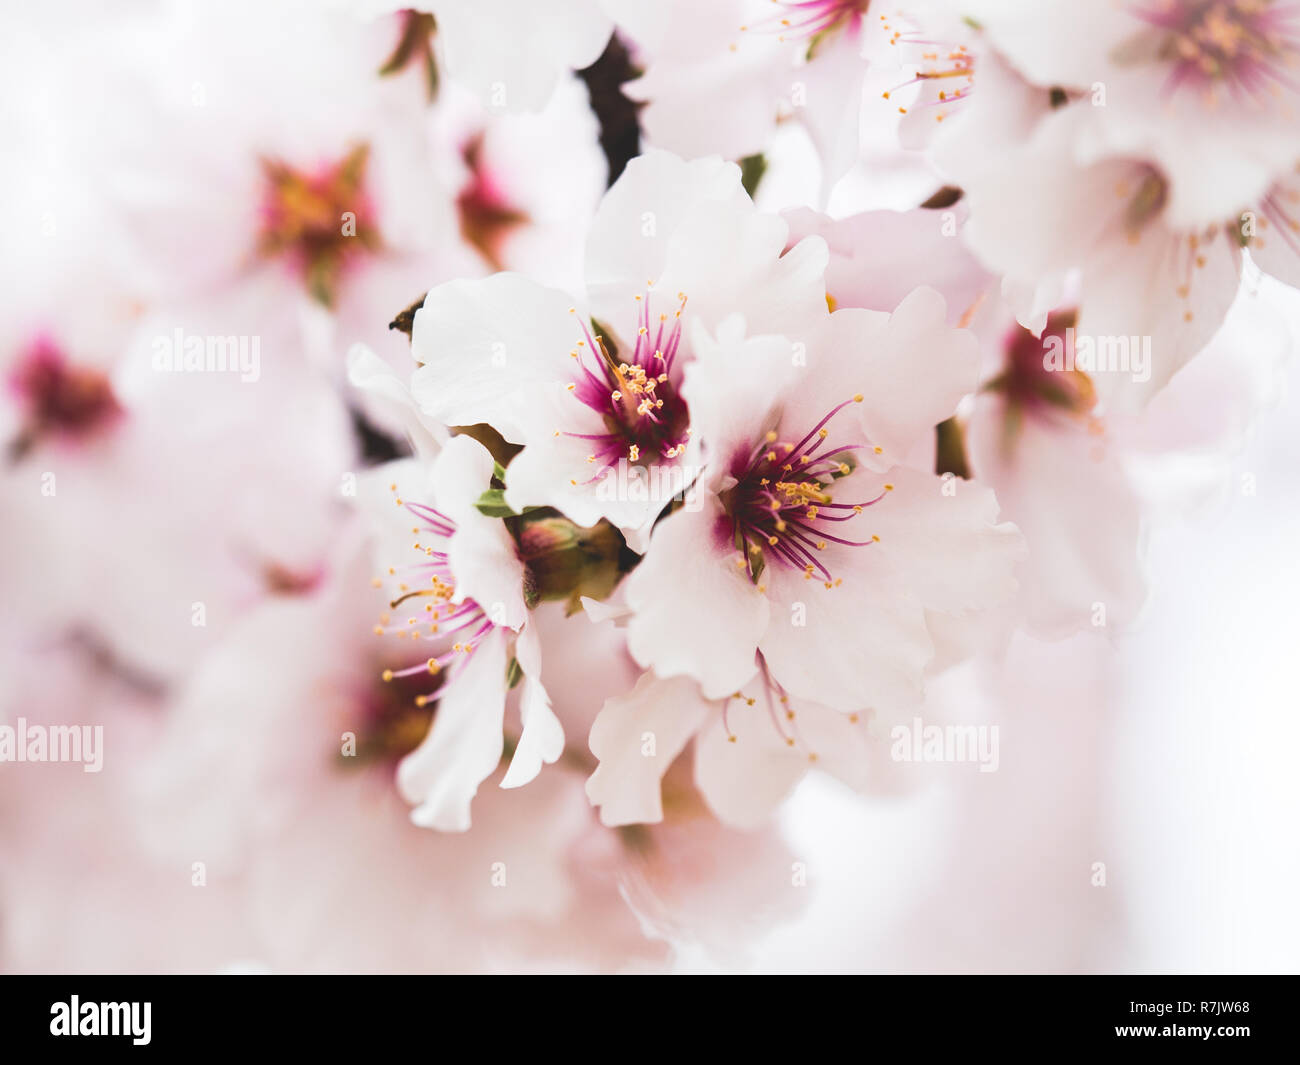 Flowering, fruit trees in flower in the region of Murcia among which are peach and almond trees. Stock Photo